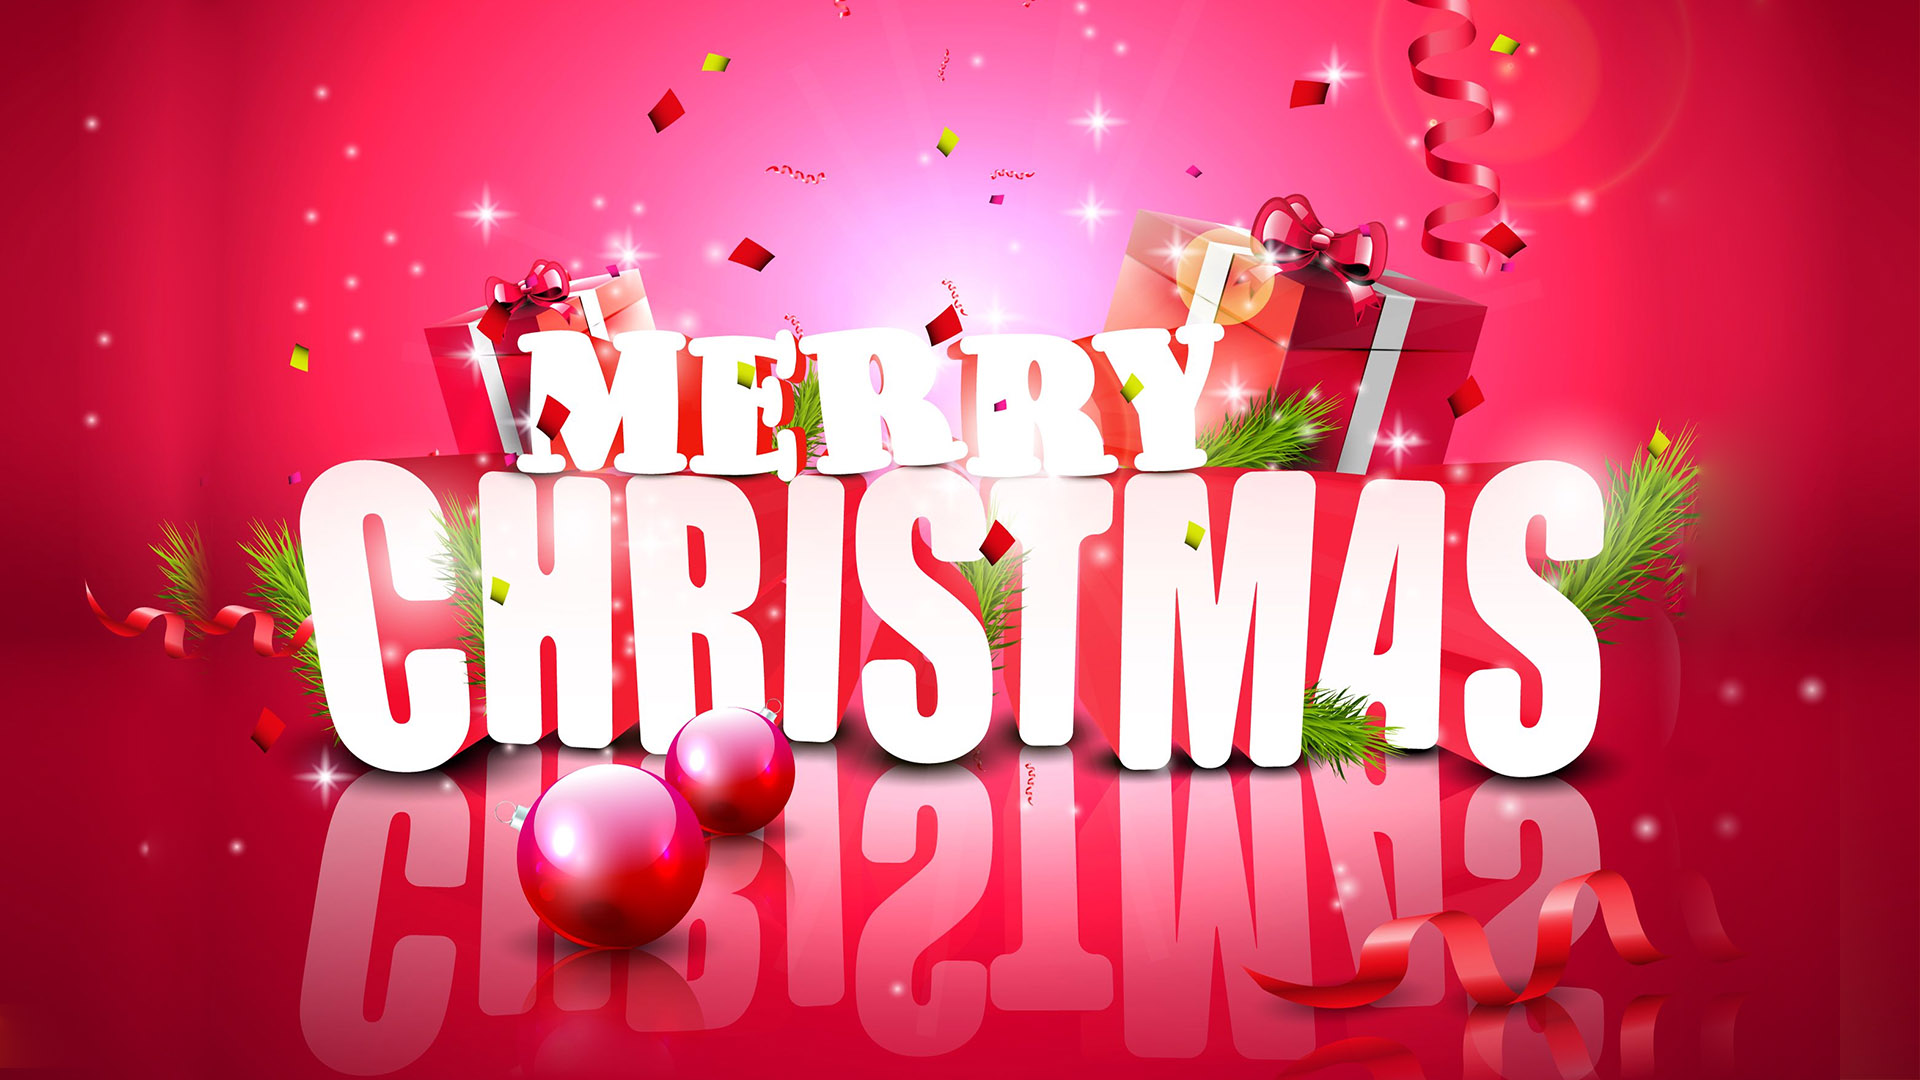 merry christmas hd wallpapers full size 1080p free download images |  Festivals